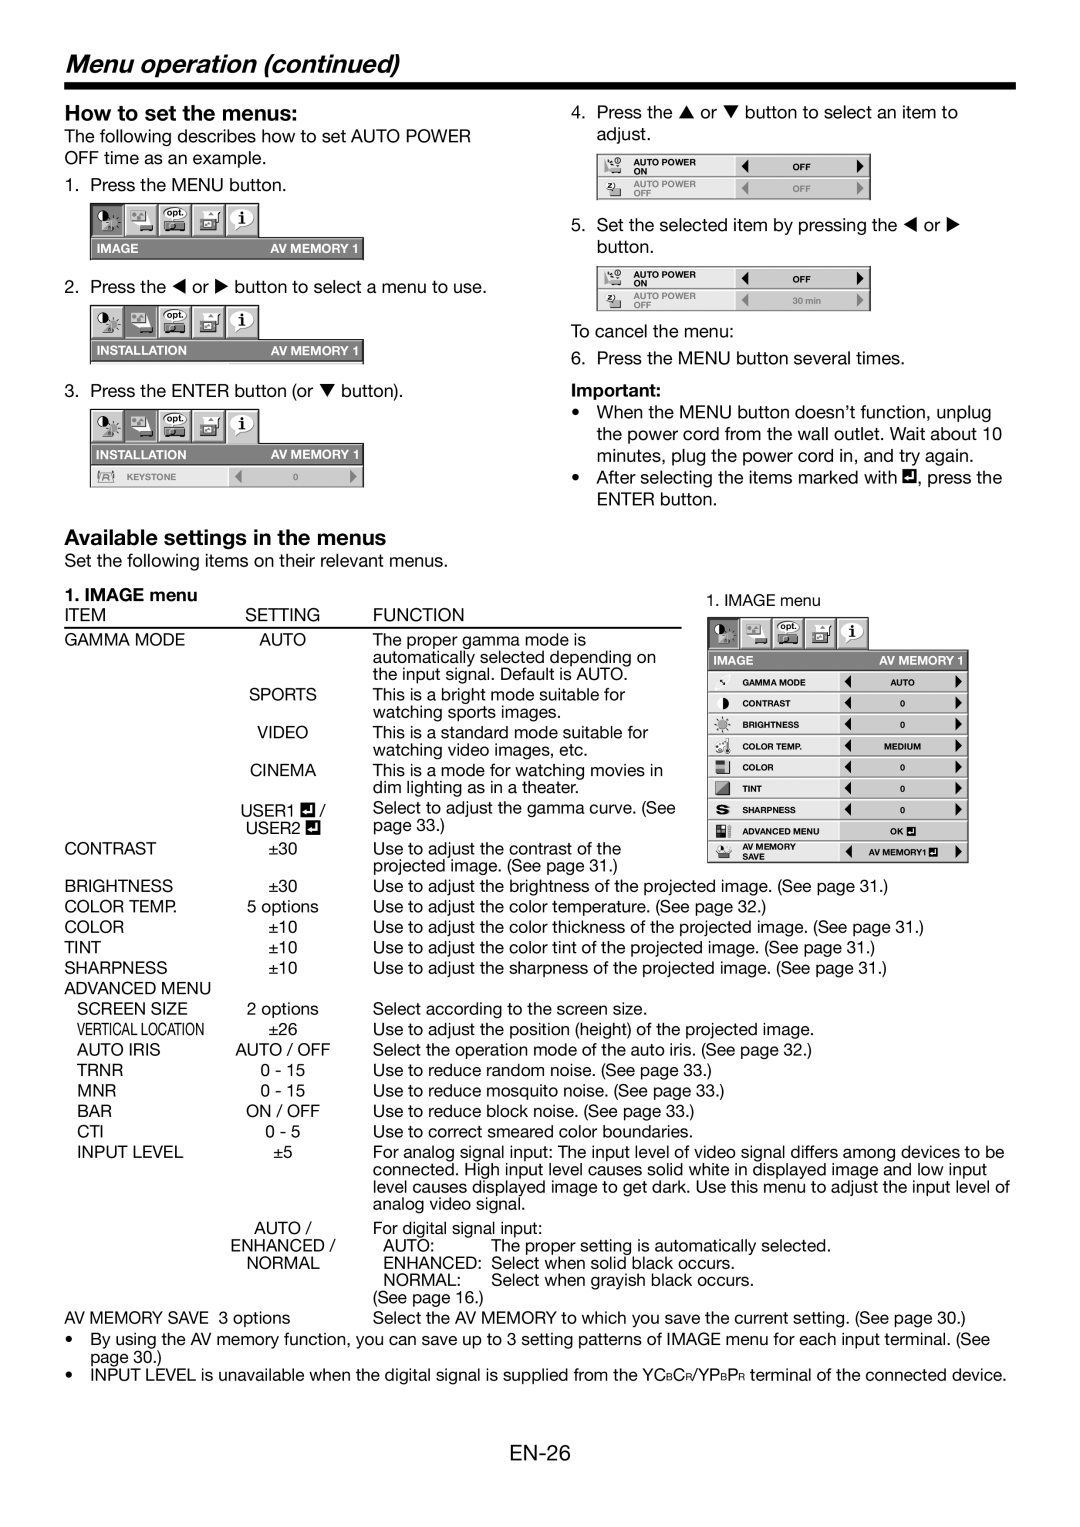 Mitsubishi Electronics HC6800 Menu operation continued, How to set the menus, Available settings in the menus, IMAGE menu 